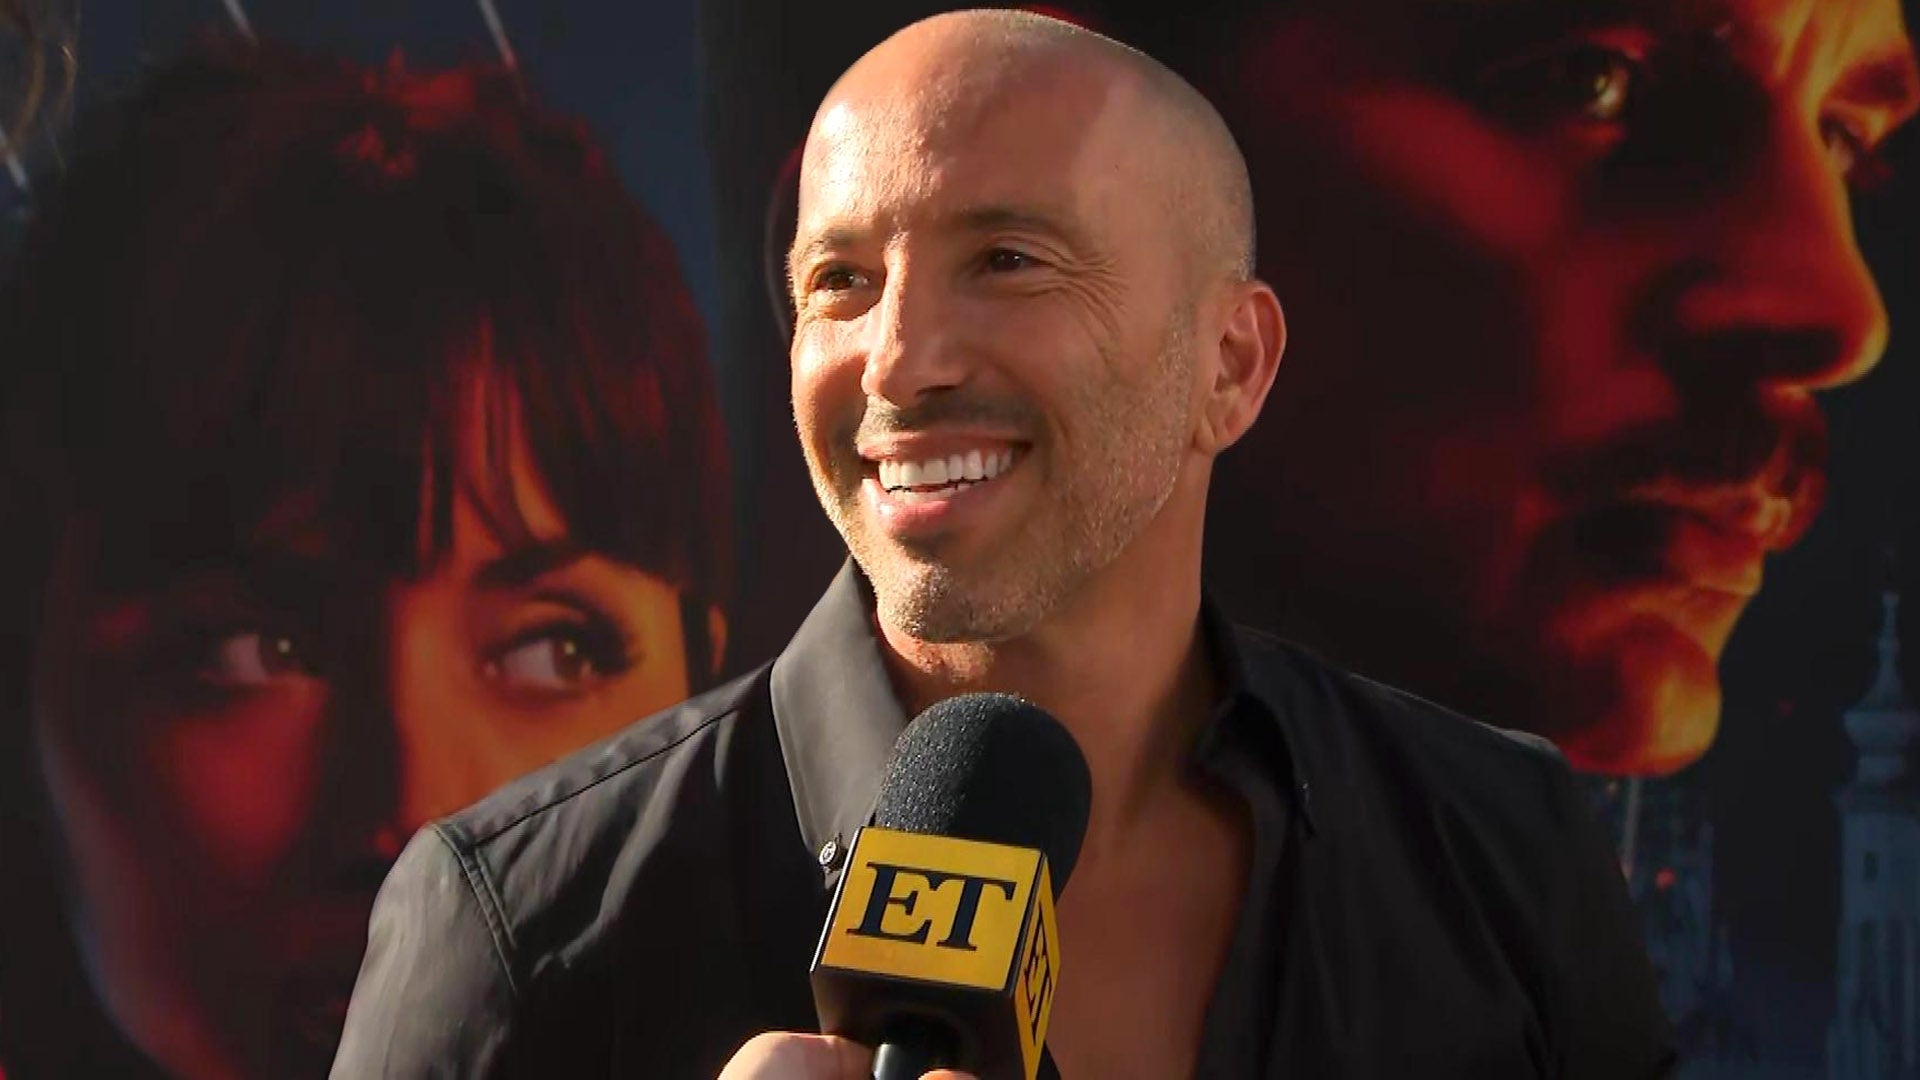 Jason Oppenheim Says He Has 'True Connection' With New Lady (Exclusive)